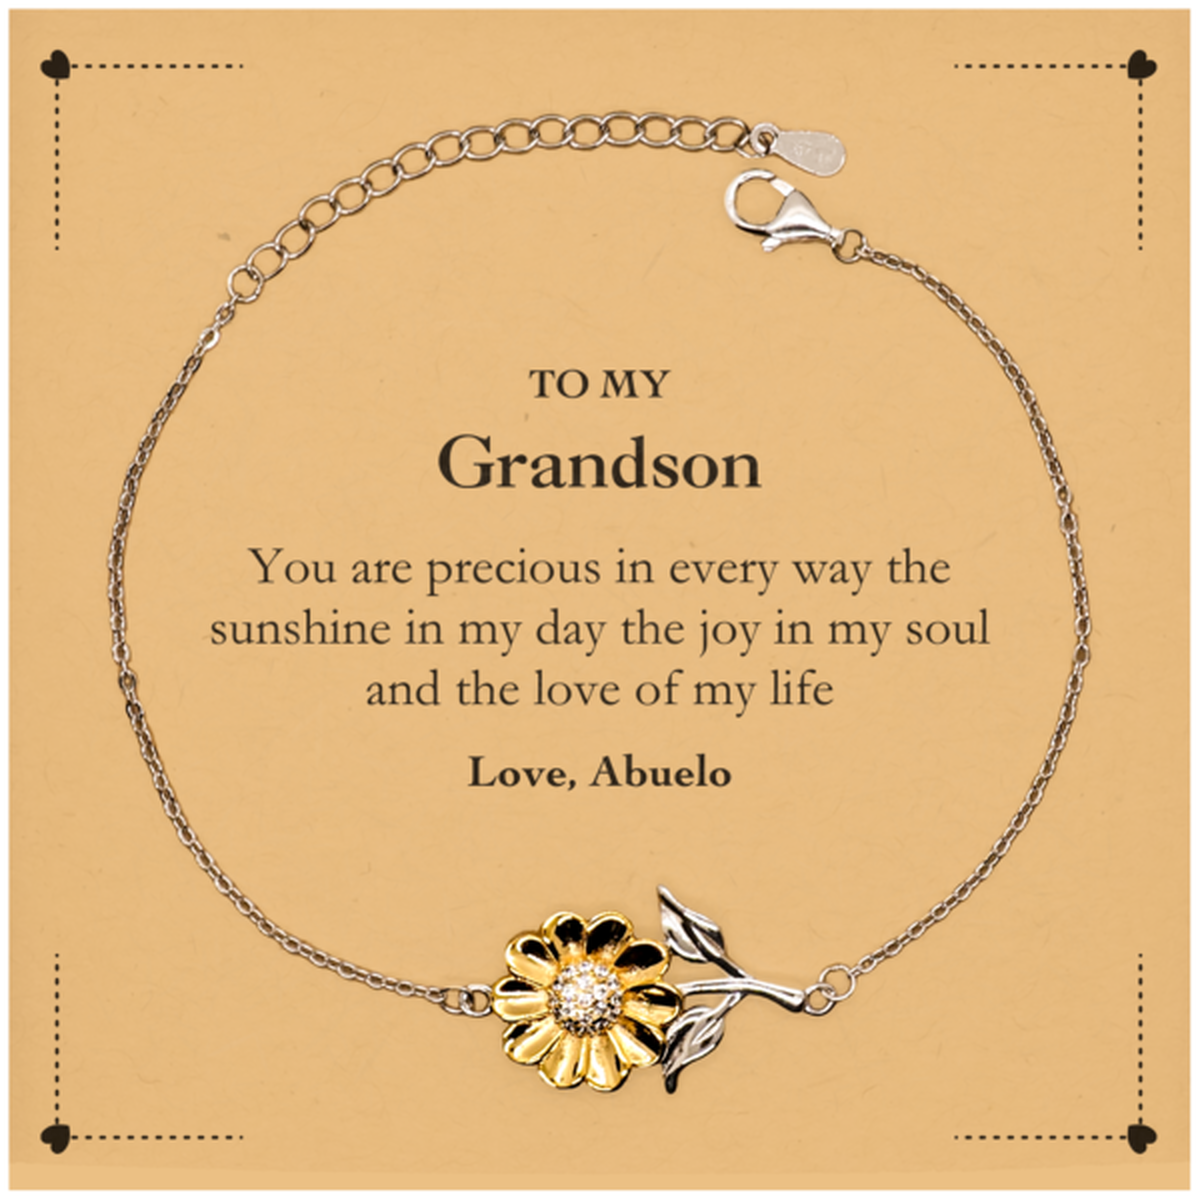 Graduation Gifts for Grandson Sunflower Bracelet Present from Abuelo, Christmas Grandson Birthday Gifts Grandson You are precious in every way the sunshine in my day. Love, Abuelo